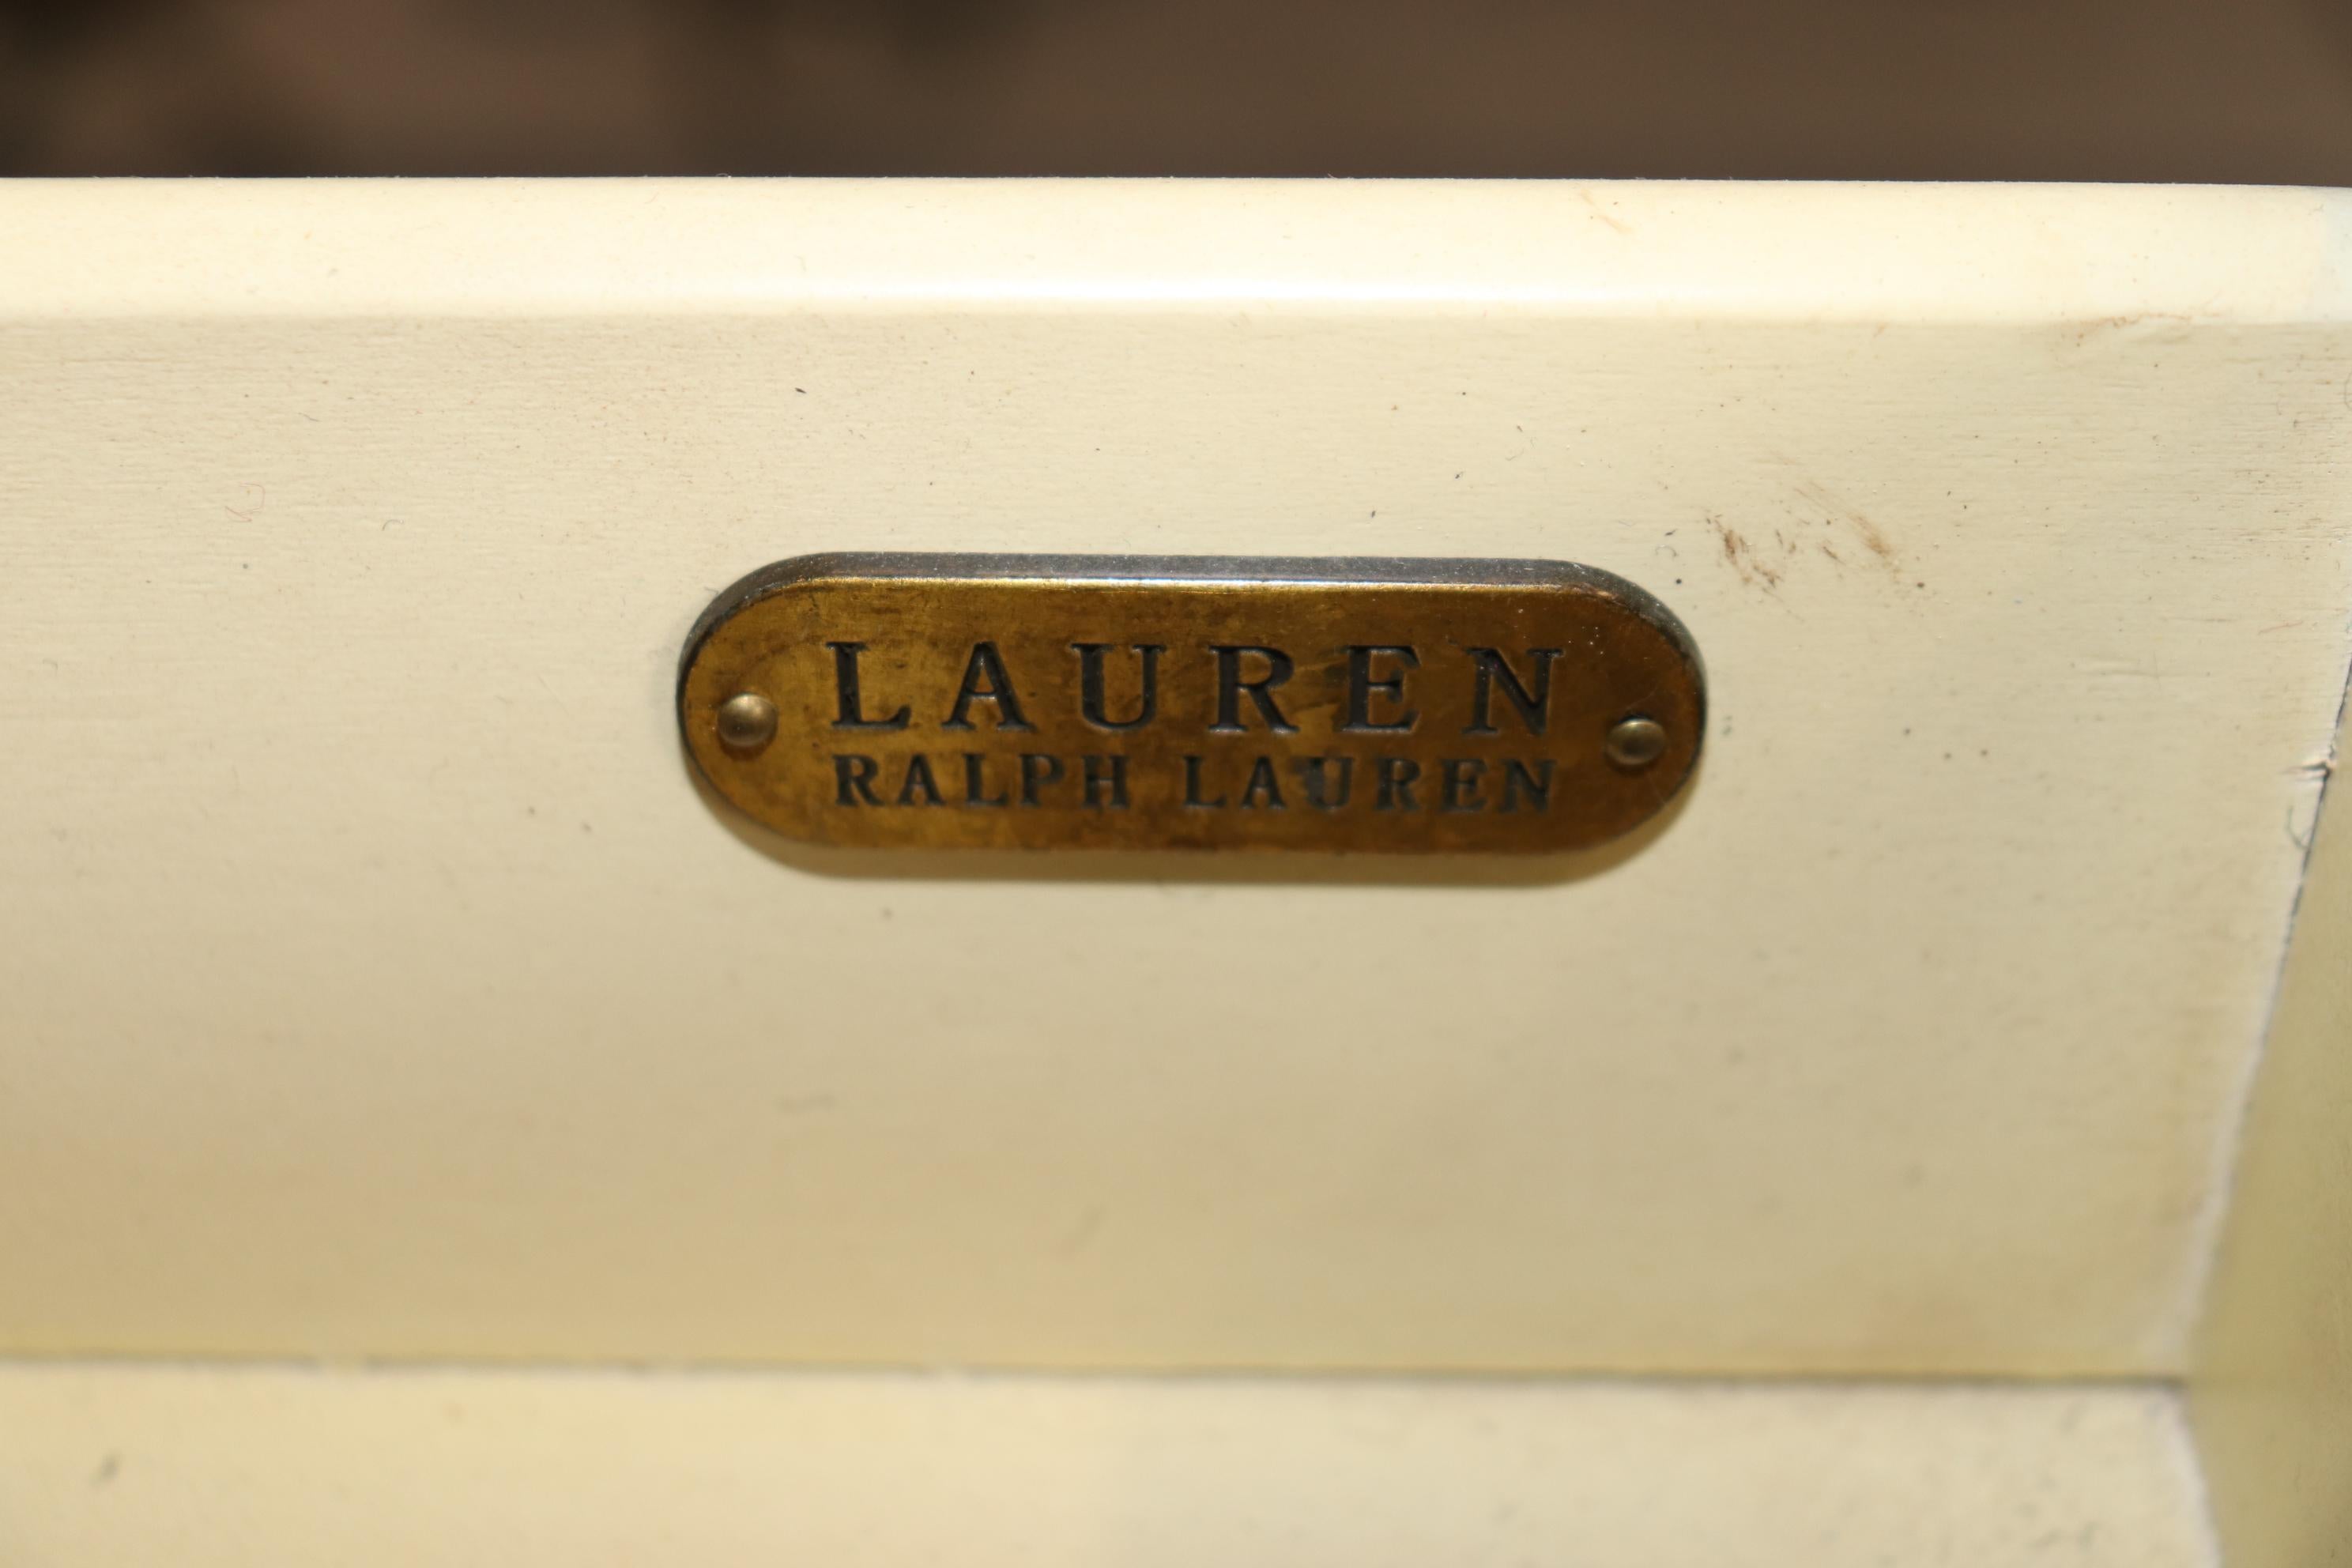 This is an intentionally distressed Ralph Lauren French Directoire style commode or dresser. The commode is in good working condition and is labeled. Measures 46 wide x 18 deep x 34 tall. The commode dates to the 2000s era. 